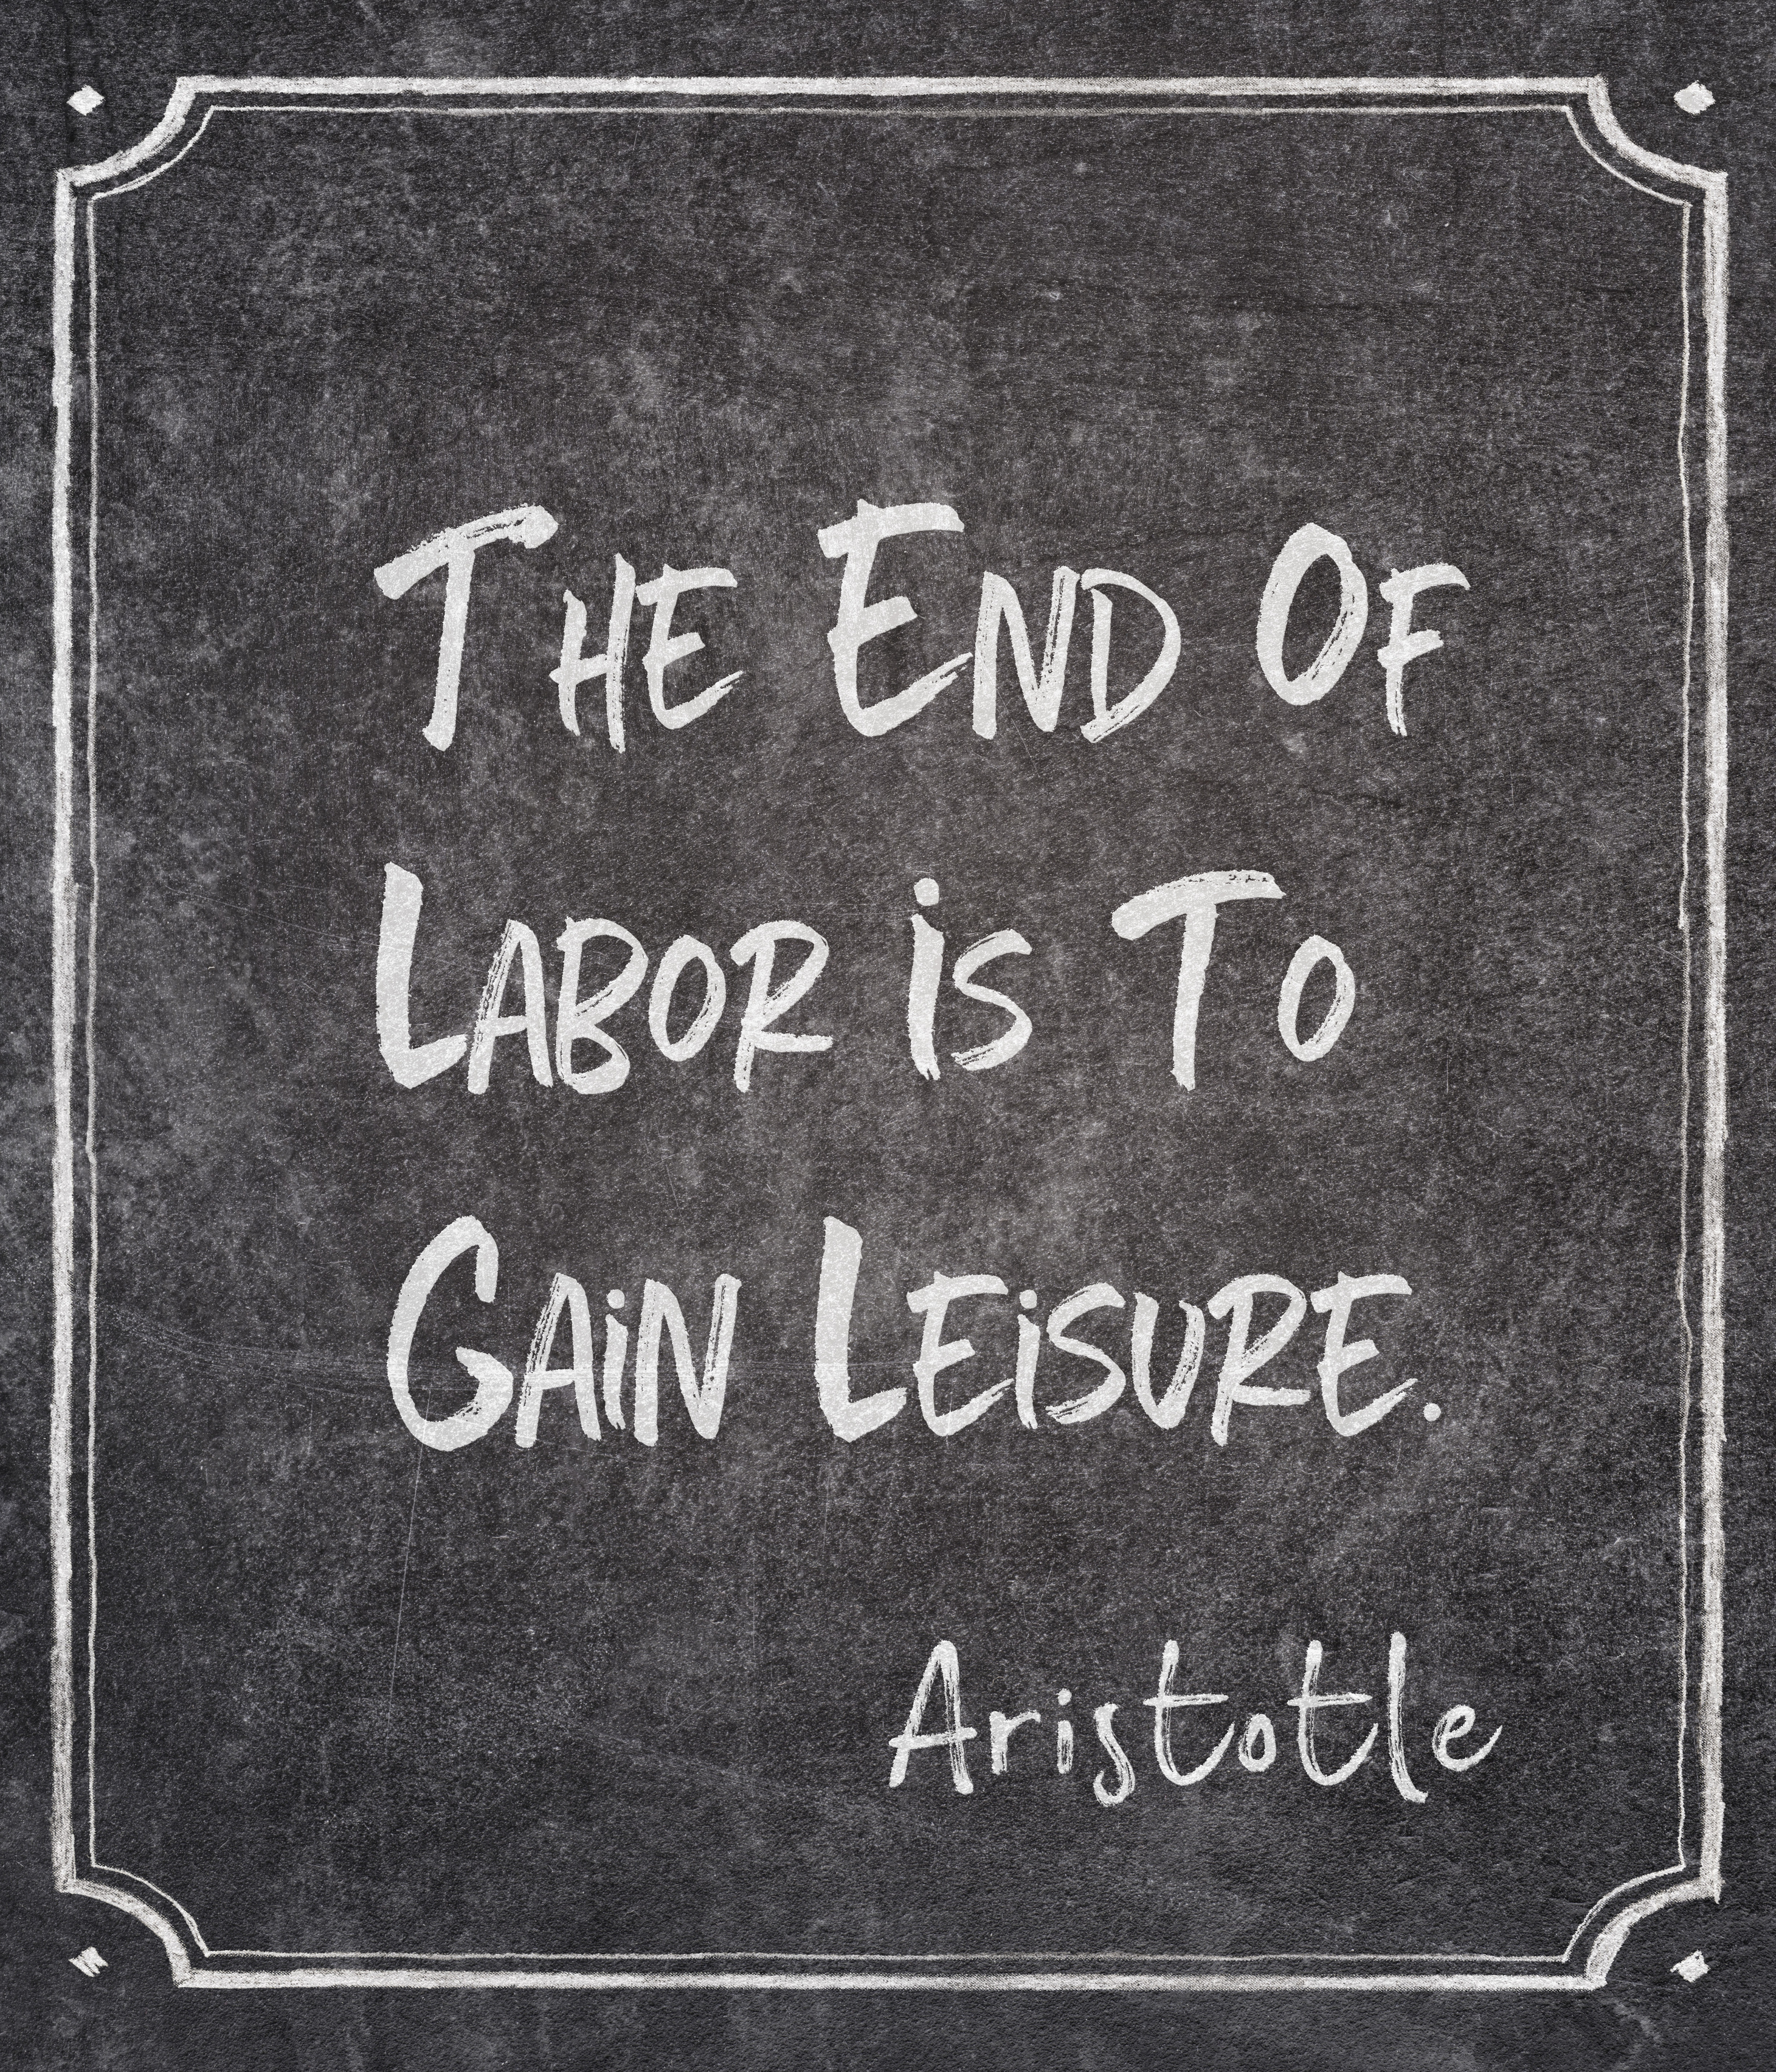 THE END OF LABOR IS LEISURE